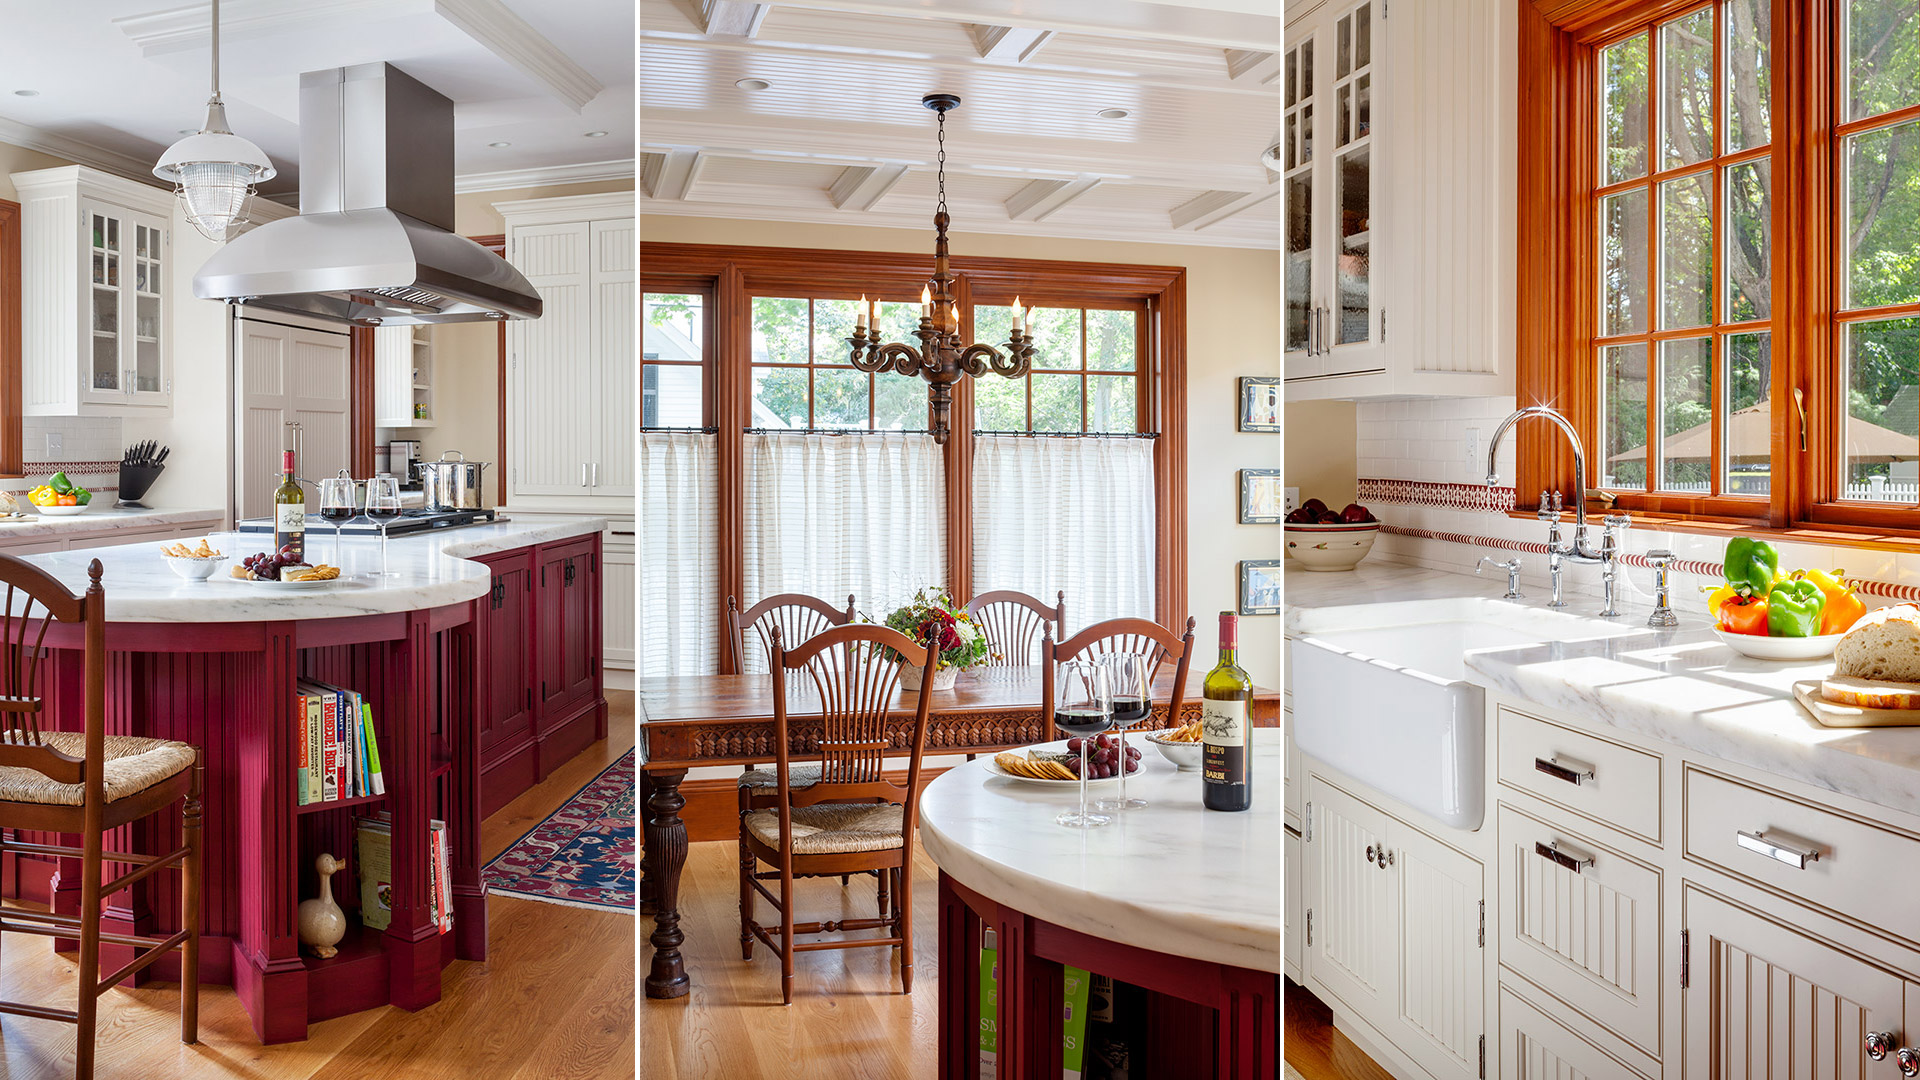 Concord Historic Home kitchen renovation and remodel with new island